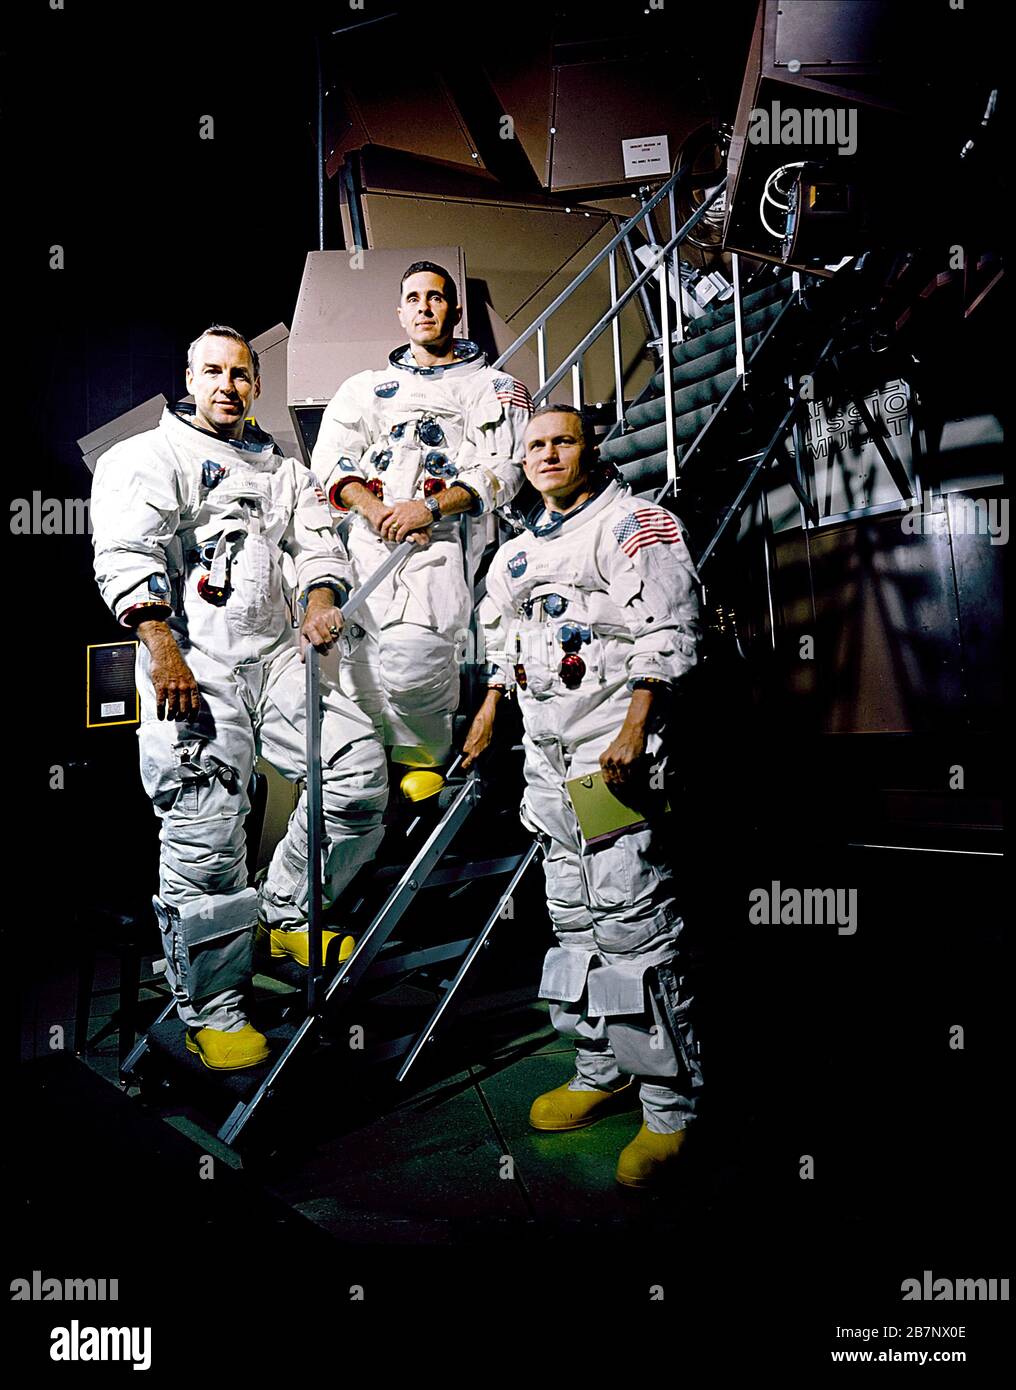 Apollo 8 - NASA, 1968. The Apollo 8 Crew included (L to R) James Lovell, Command Module (CM) pilot; William Anders, Lunar Module (LM) Pilot; and Frank Borman, Commander. Apollo 8 was the first manned Apollo mission aboard the Saturn V and first manned Apollo craft to enter lunar orbit, the SA-503, Apollo 8 mission liftoff occurred on December 21, 1968. Stock Photo